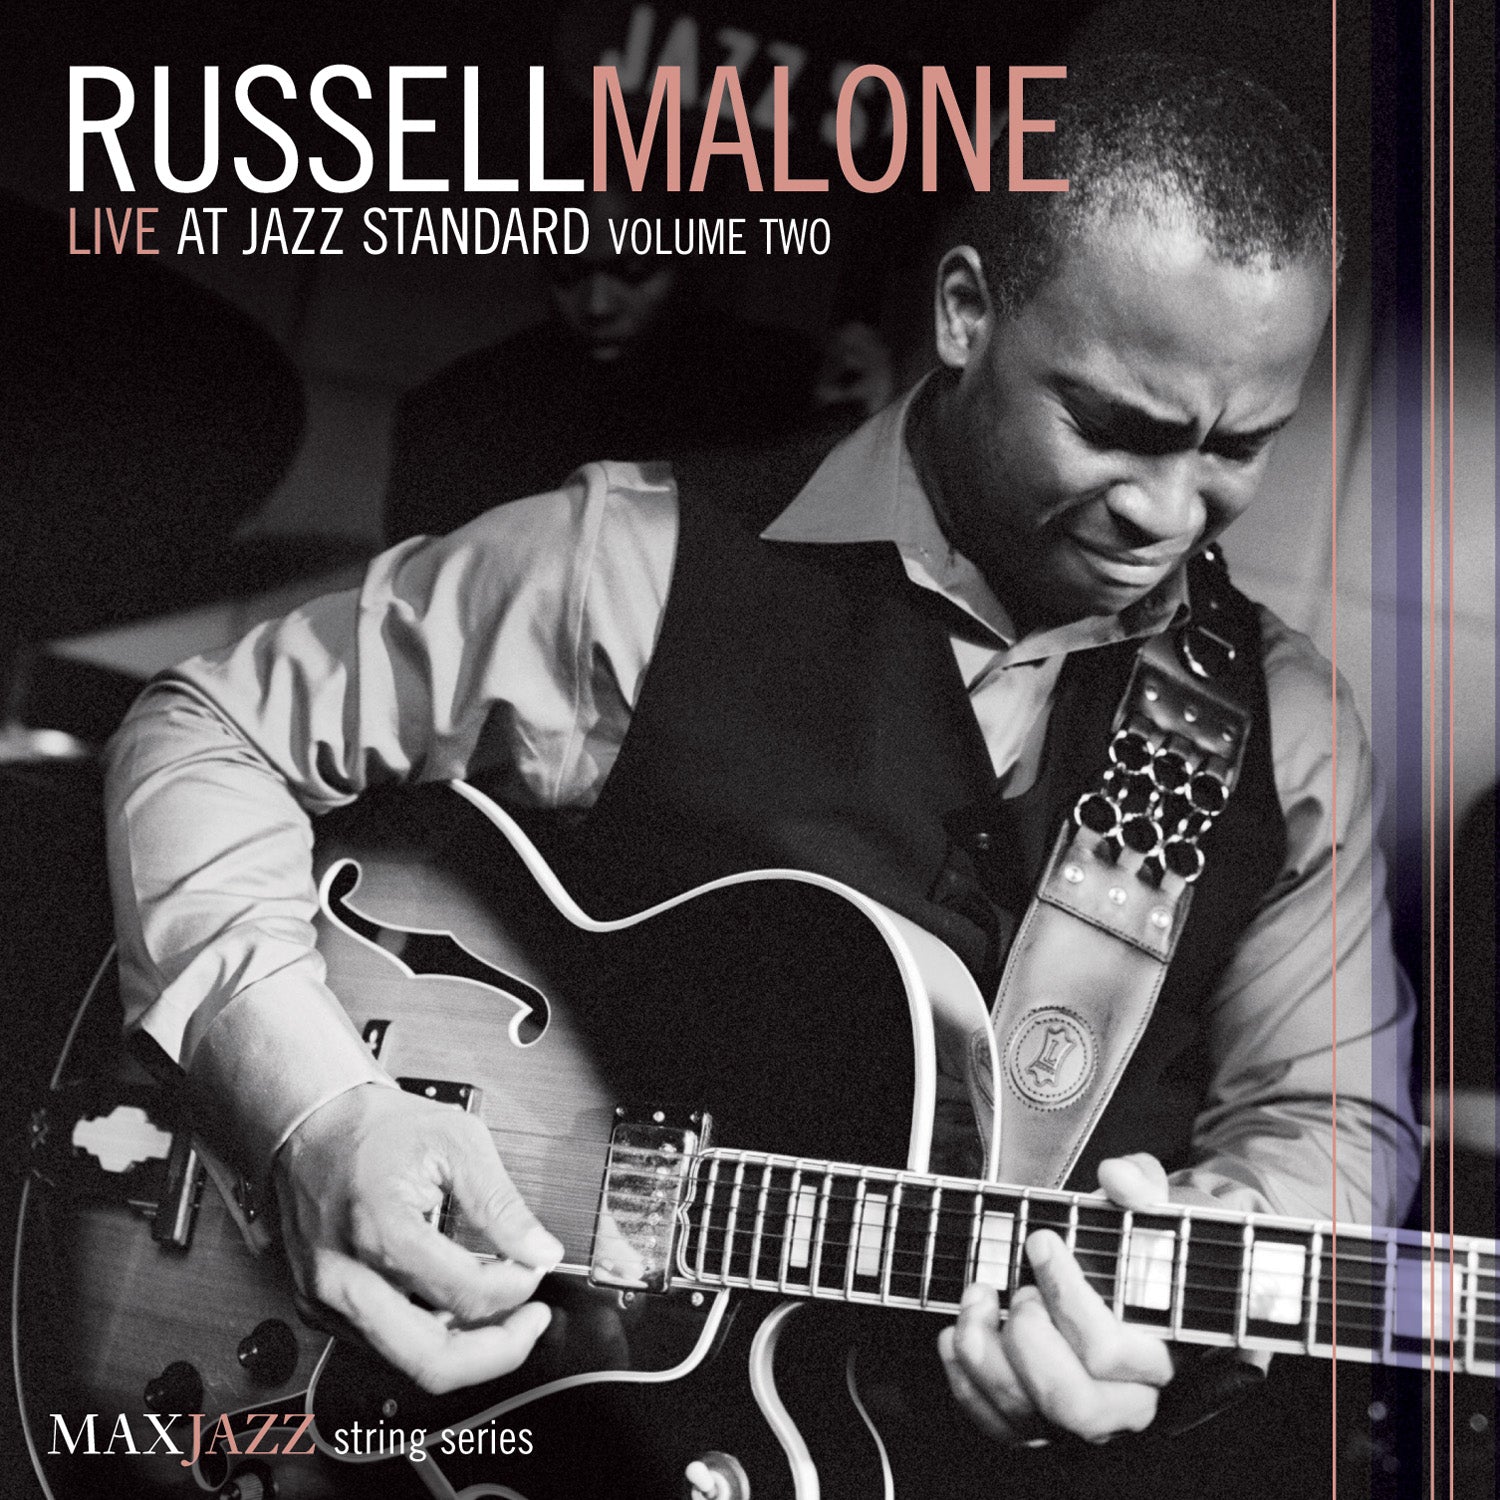 Russell Malone - Live at Jazz Standard Volume Two